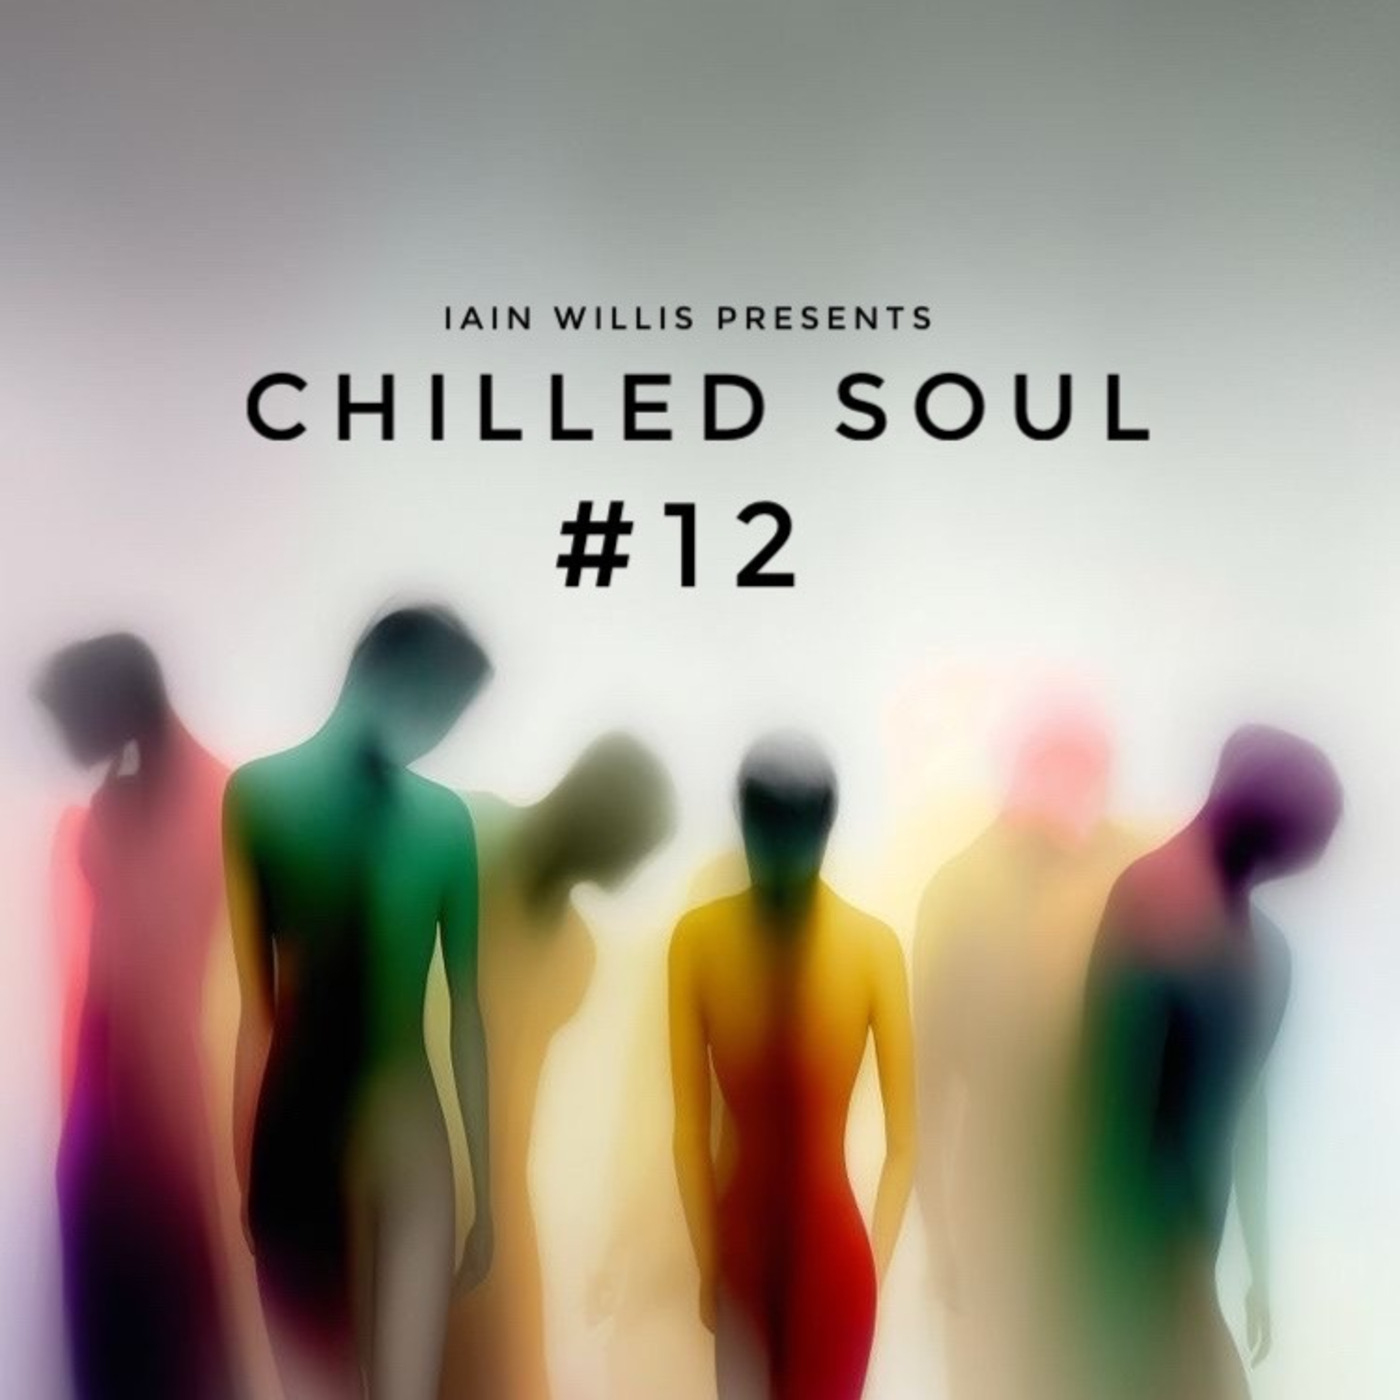 Chilled Soul #12 - Iain Willis